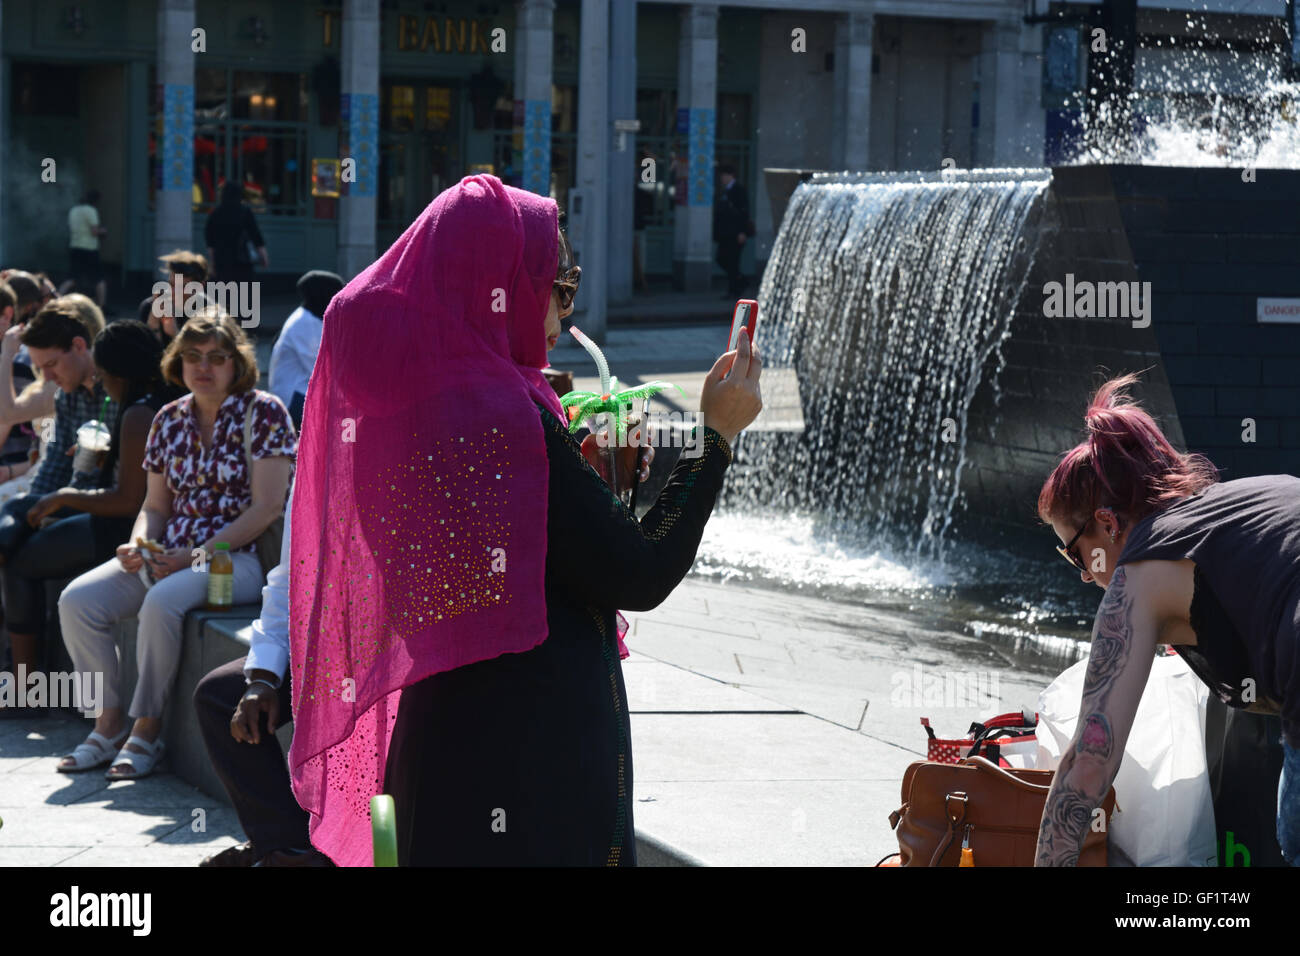 Muslim woman in Pink hijab, taking photograph on mobile phone. Stock Photo